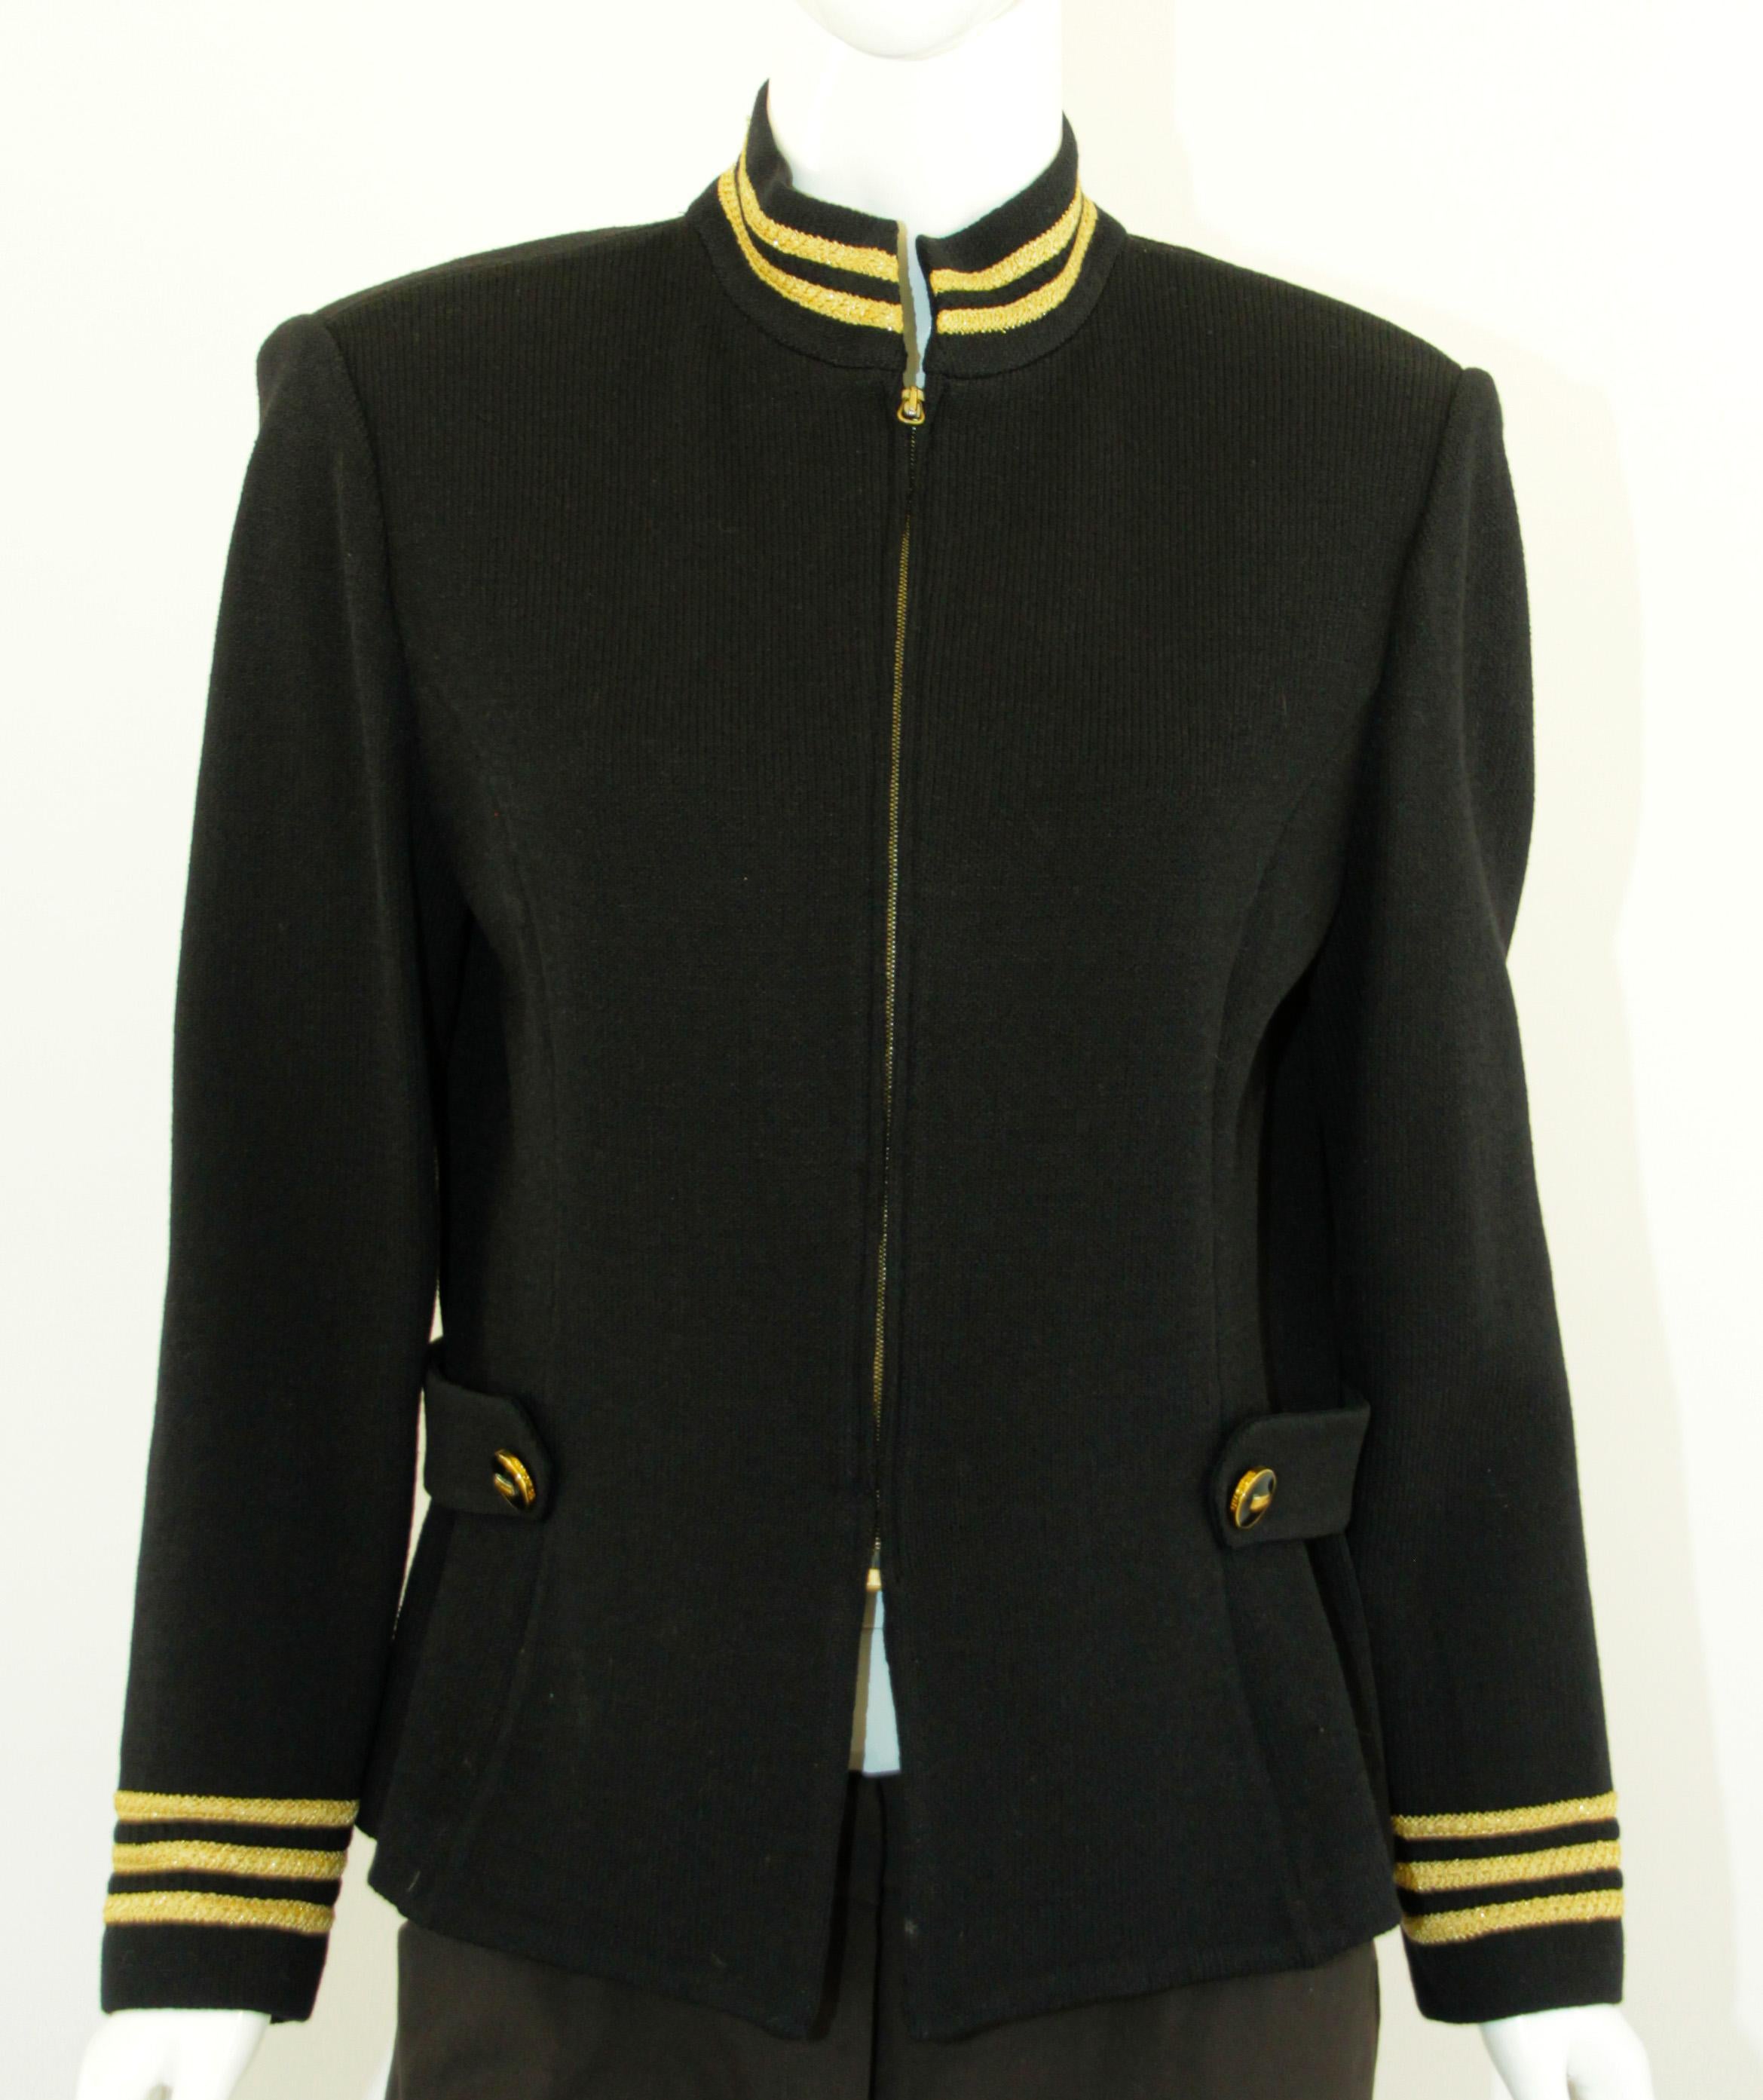 St. John Military Blazer Knit Jacket 1990's Black and Gold For Sale 8